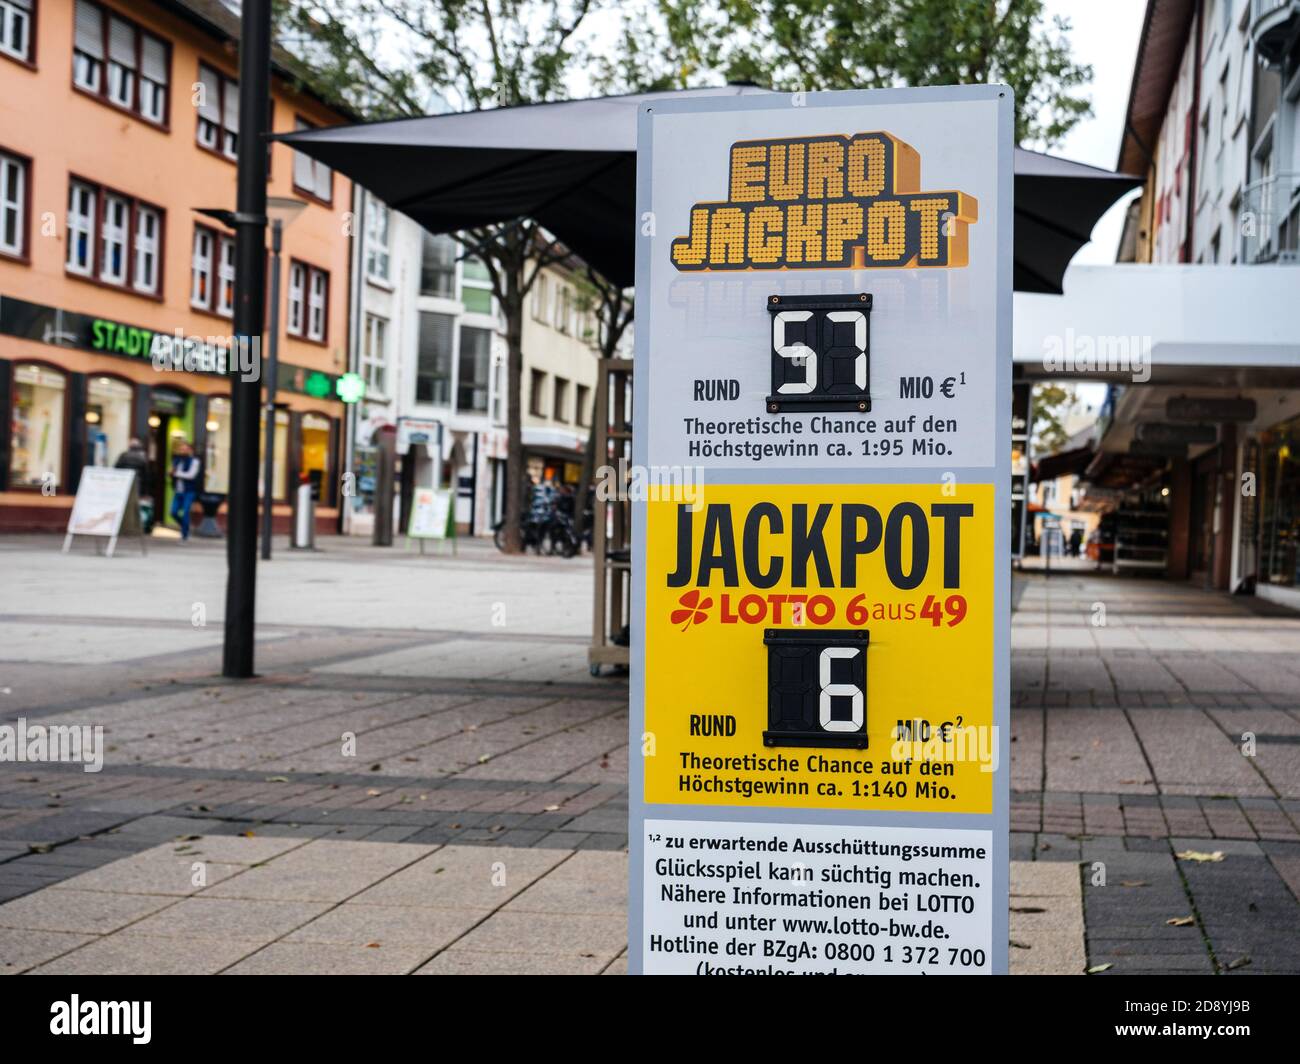 Kehl, Germany - Oct 16, 2020: Street sign Euro jackpot with 57 euro  millions lottery draw and Lotto 6 from 49 with 6 million draw - empty  street due to Covid-19 pandemic situation Stock Photo - Alamy